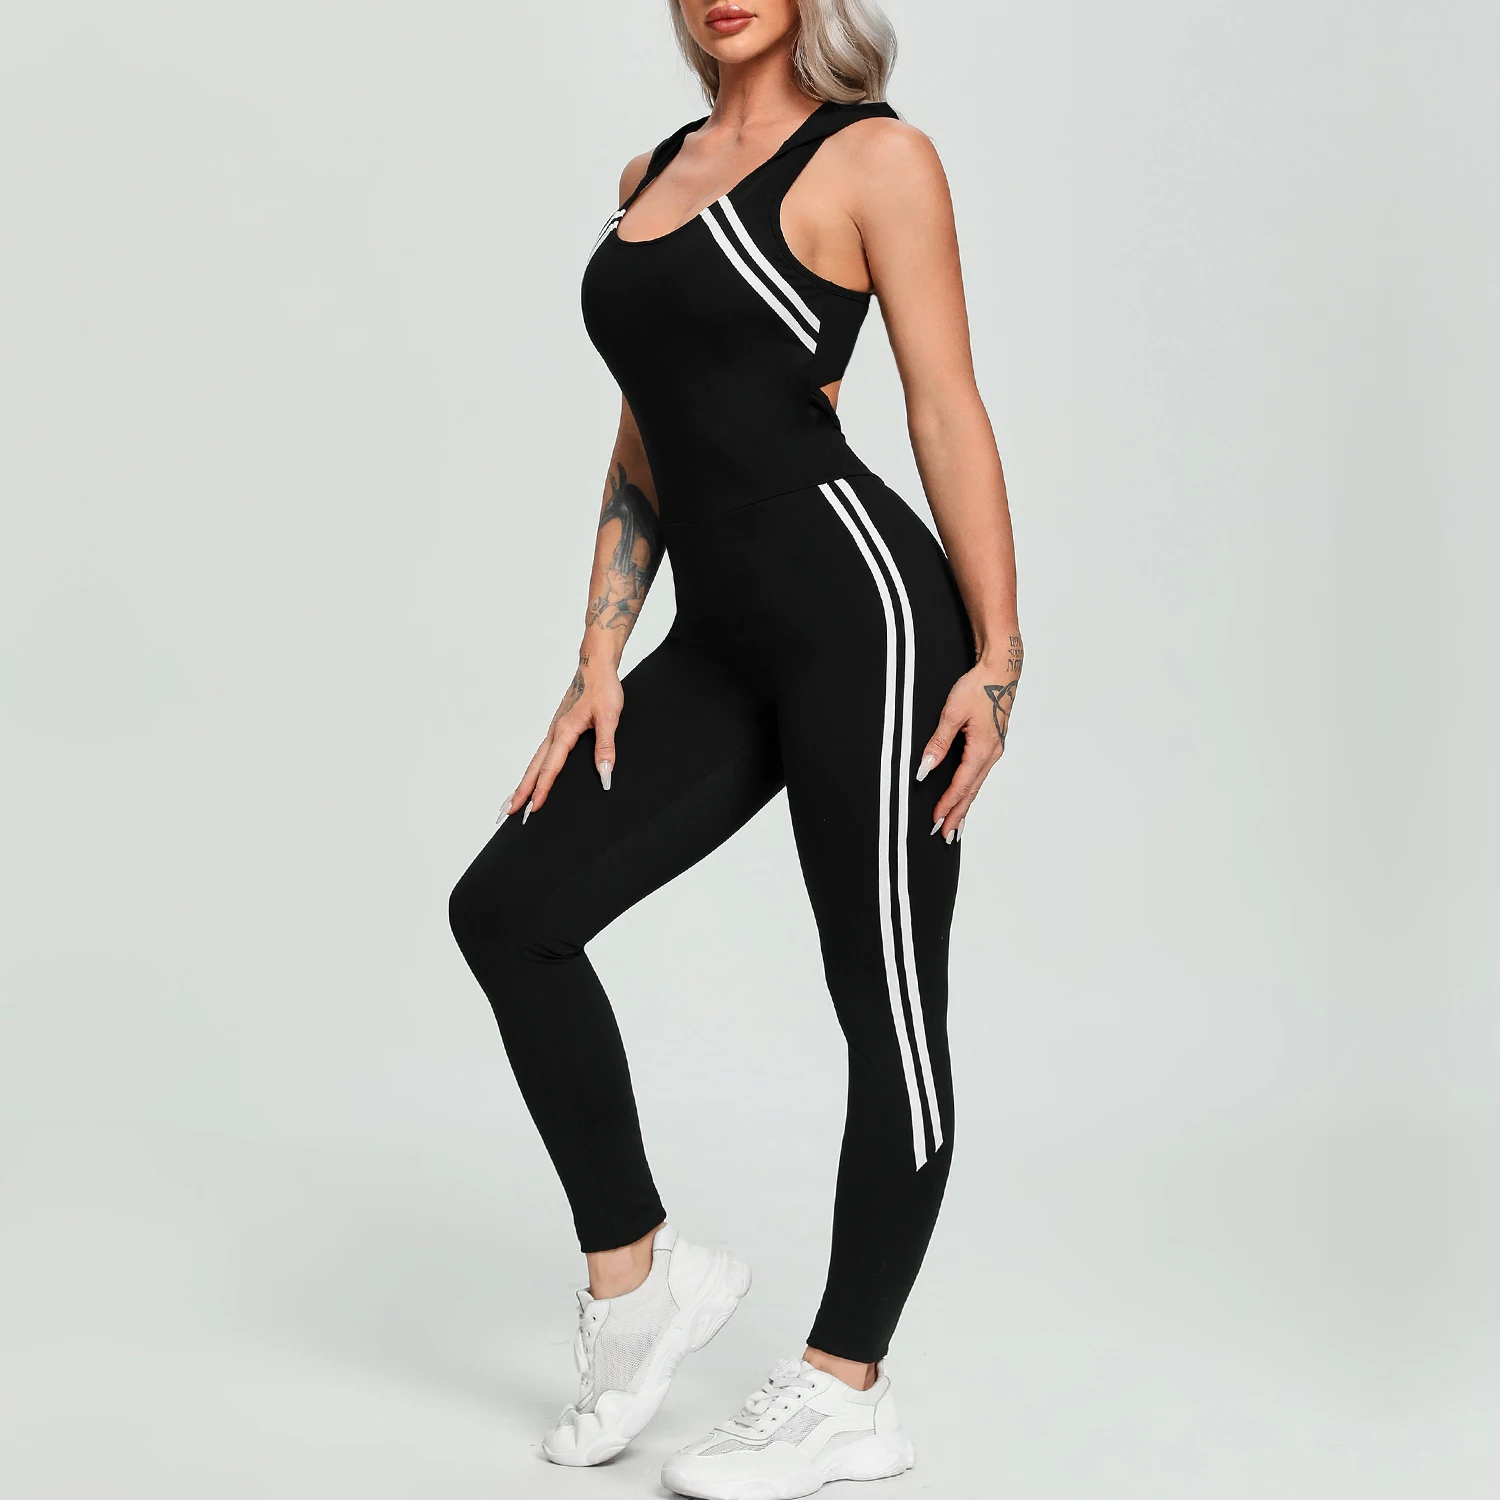 Women's Sport Striped Yoga Gym Athletic Rompers Suit Fitness Workout Jumpsuit Bodysuits Running Fitness Leggings Casual Pants 2